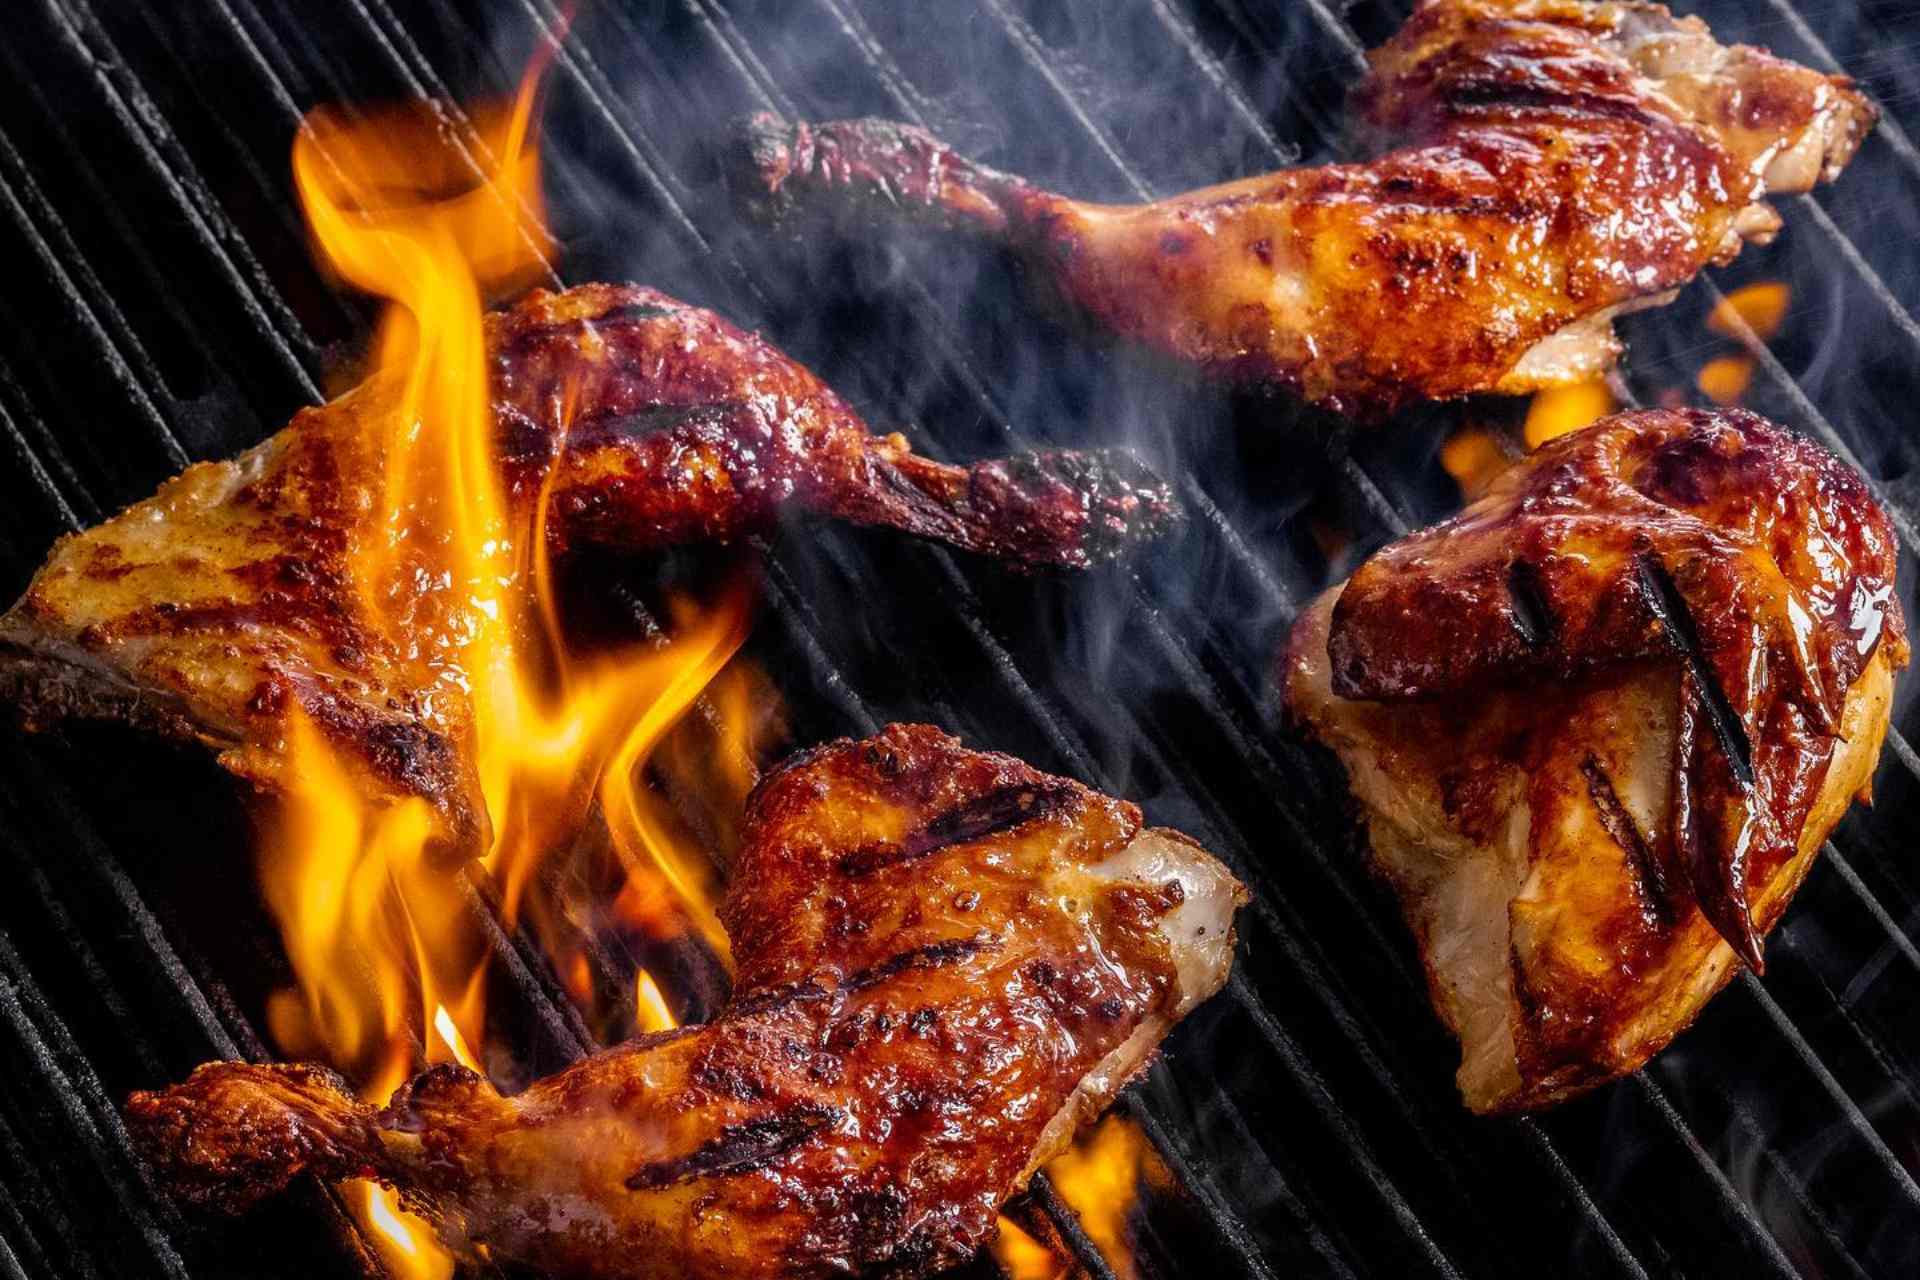 10 Best Places to Go for Cheap Eats in Glebe - Charcoal grilled Nandos chicken at Broadway Shopping Centre